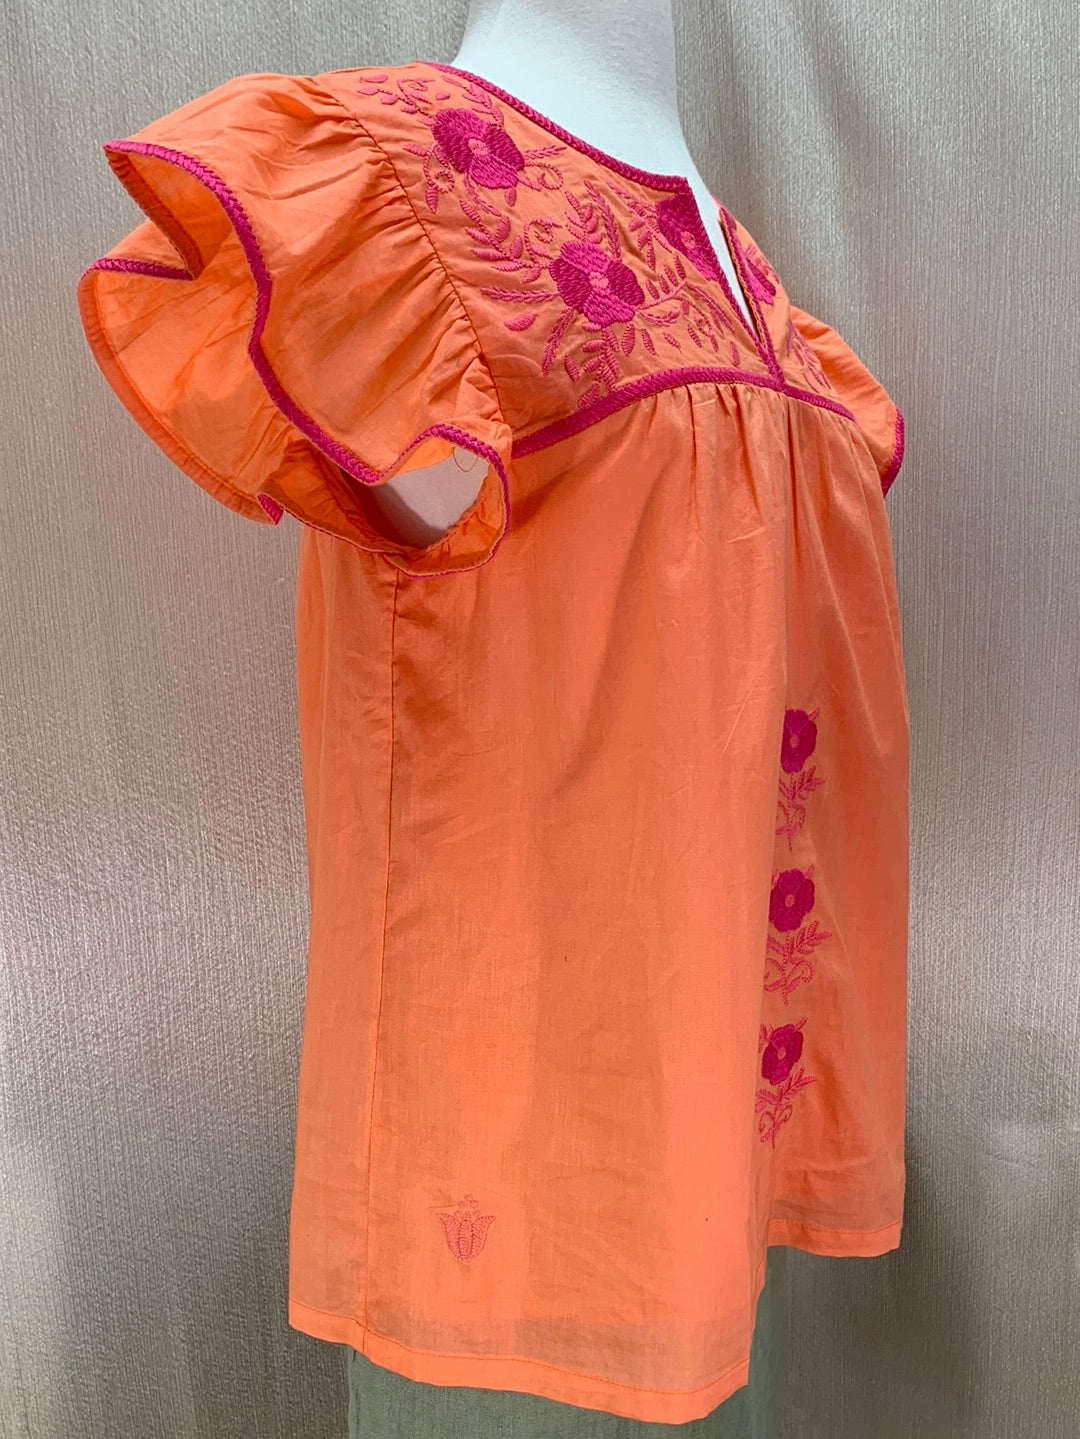 NWT - J MARIE orange pink Embroidered Flutter Sleeve Lined Krista Top - M